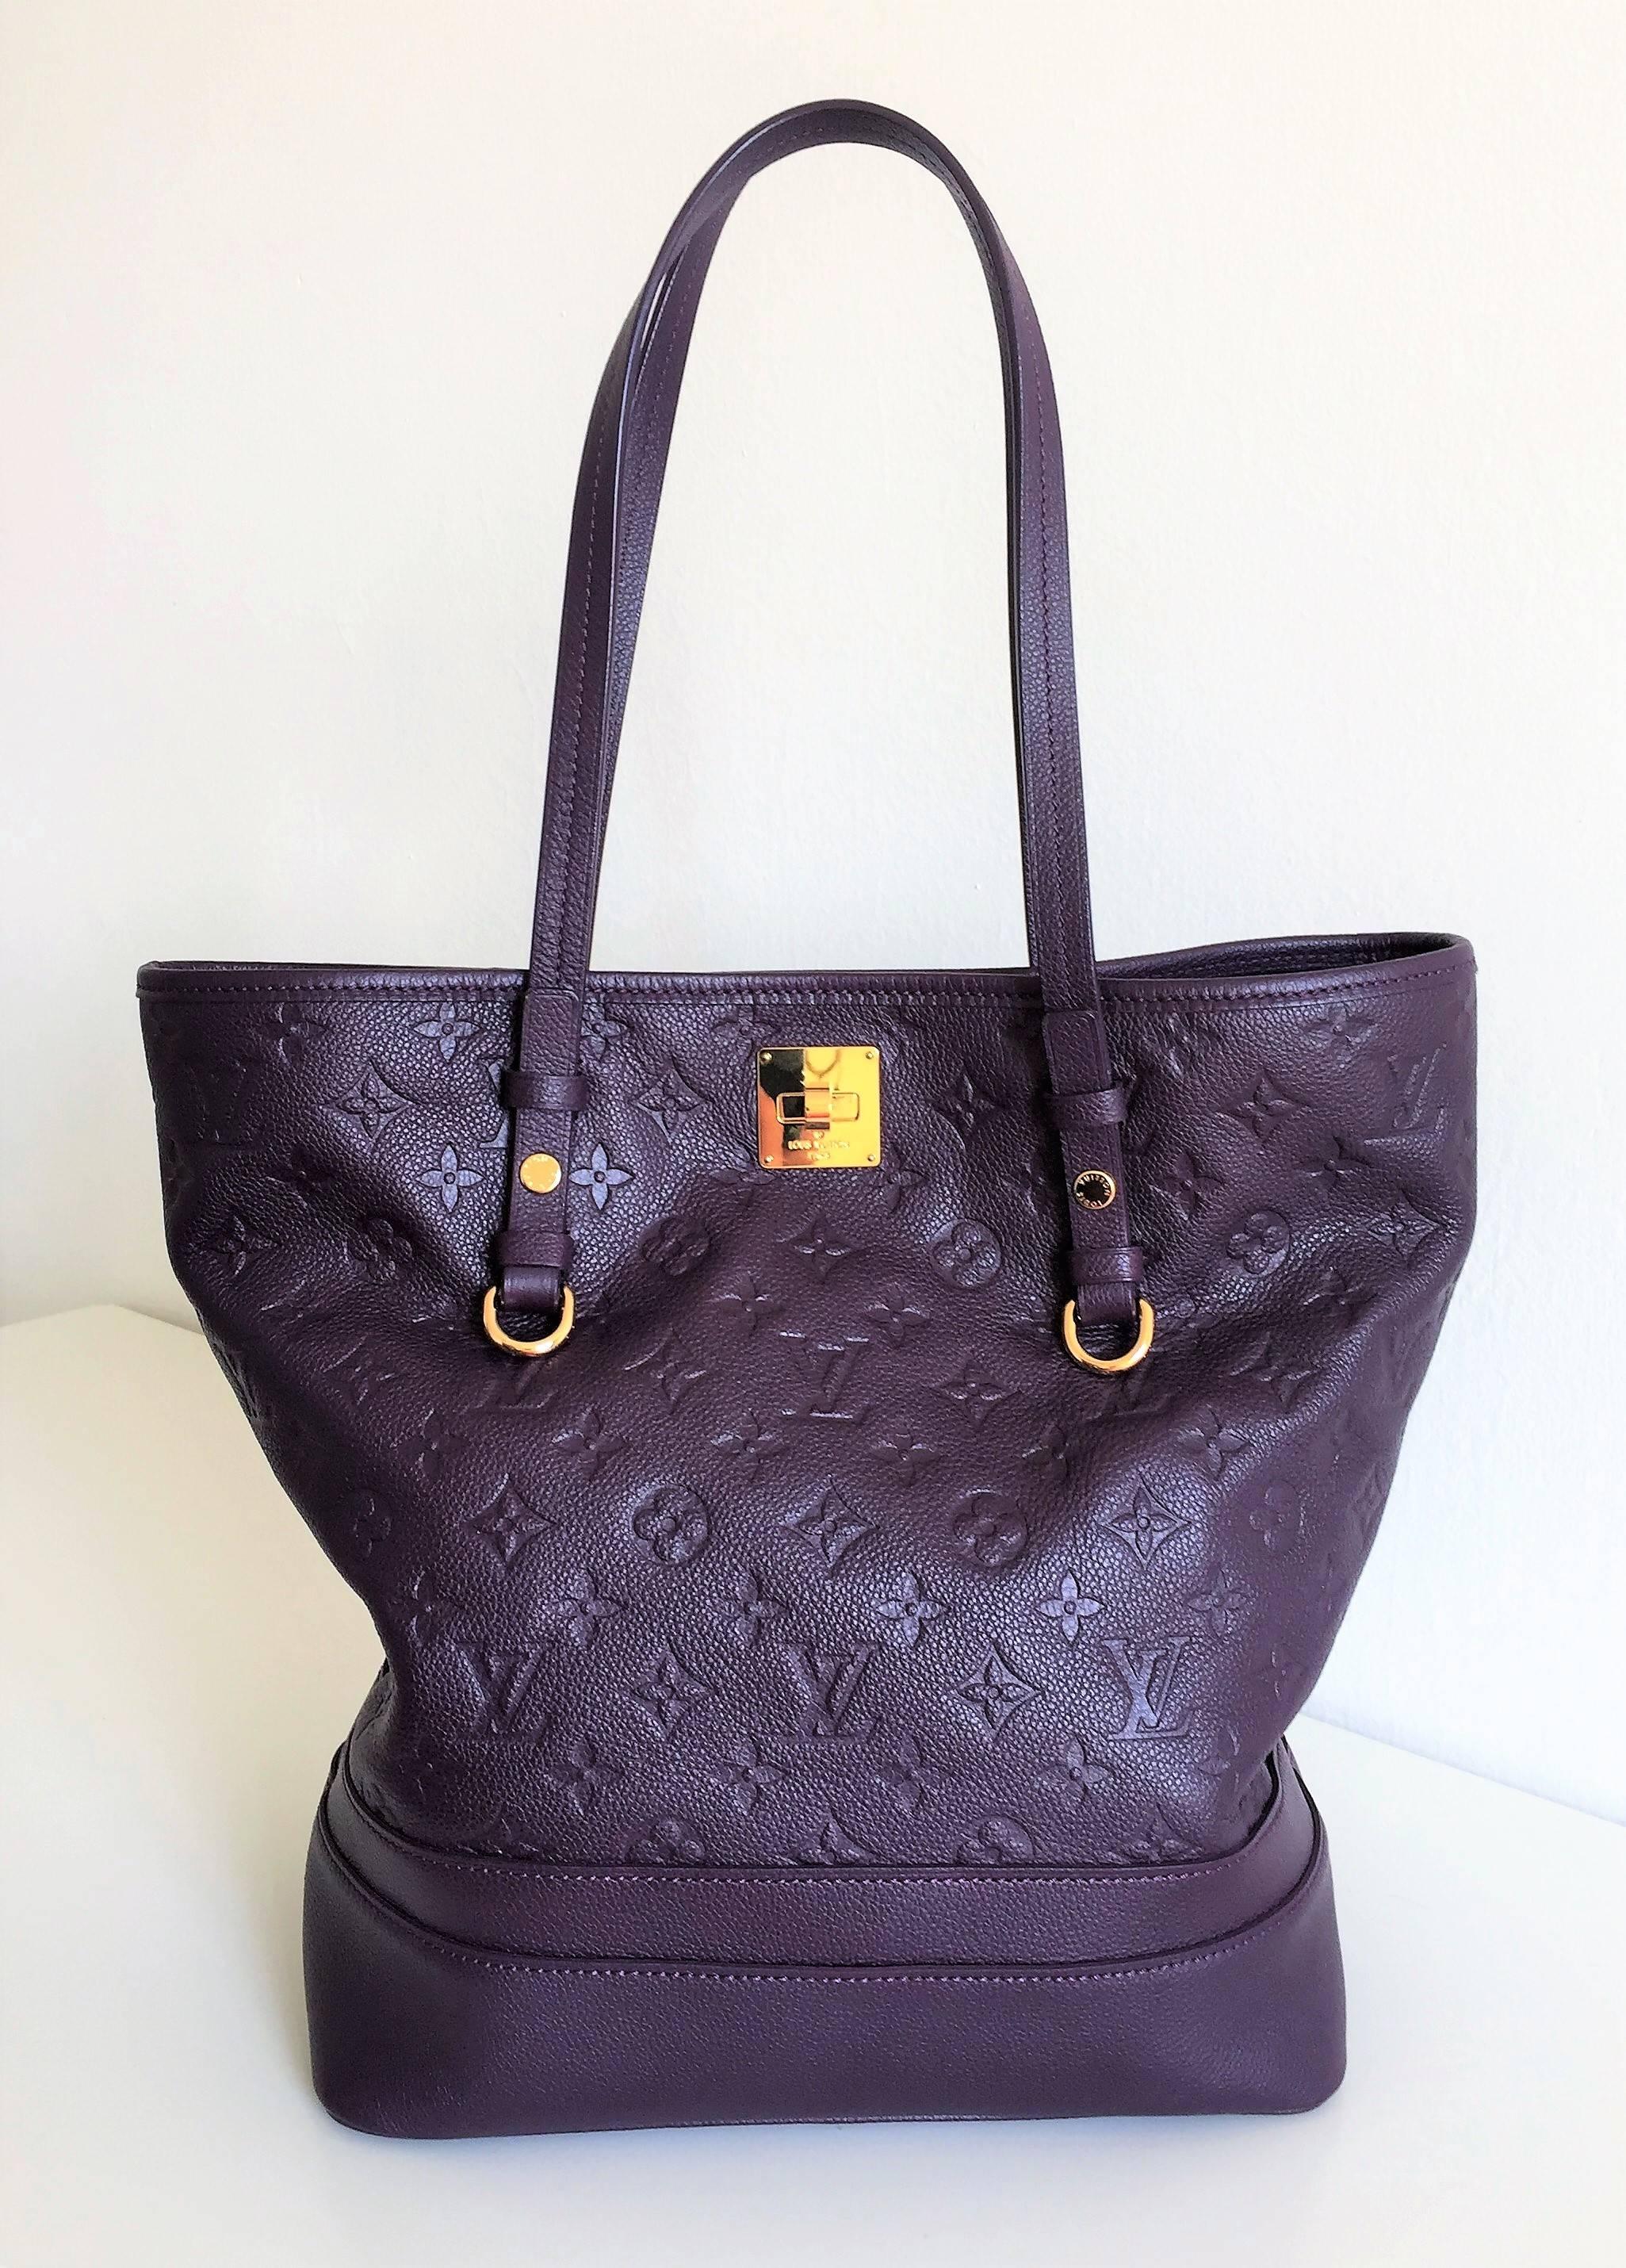 This is a Louis Vuitton Citadines, a charming shoulder tote made in purple embossed Leather decorated with classic LV monogram 'empreinte' style, double handle, golden hardware, clasp closures, it comes with its original pochette and dust